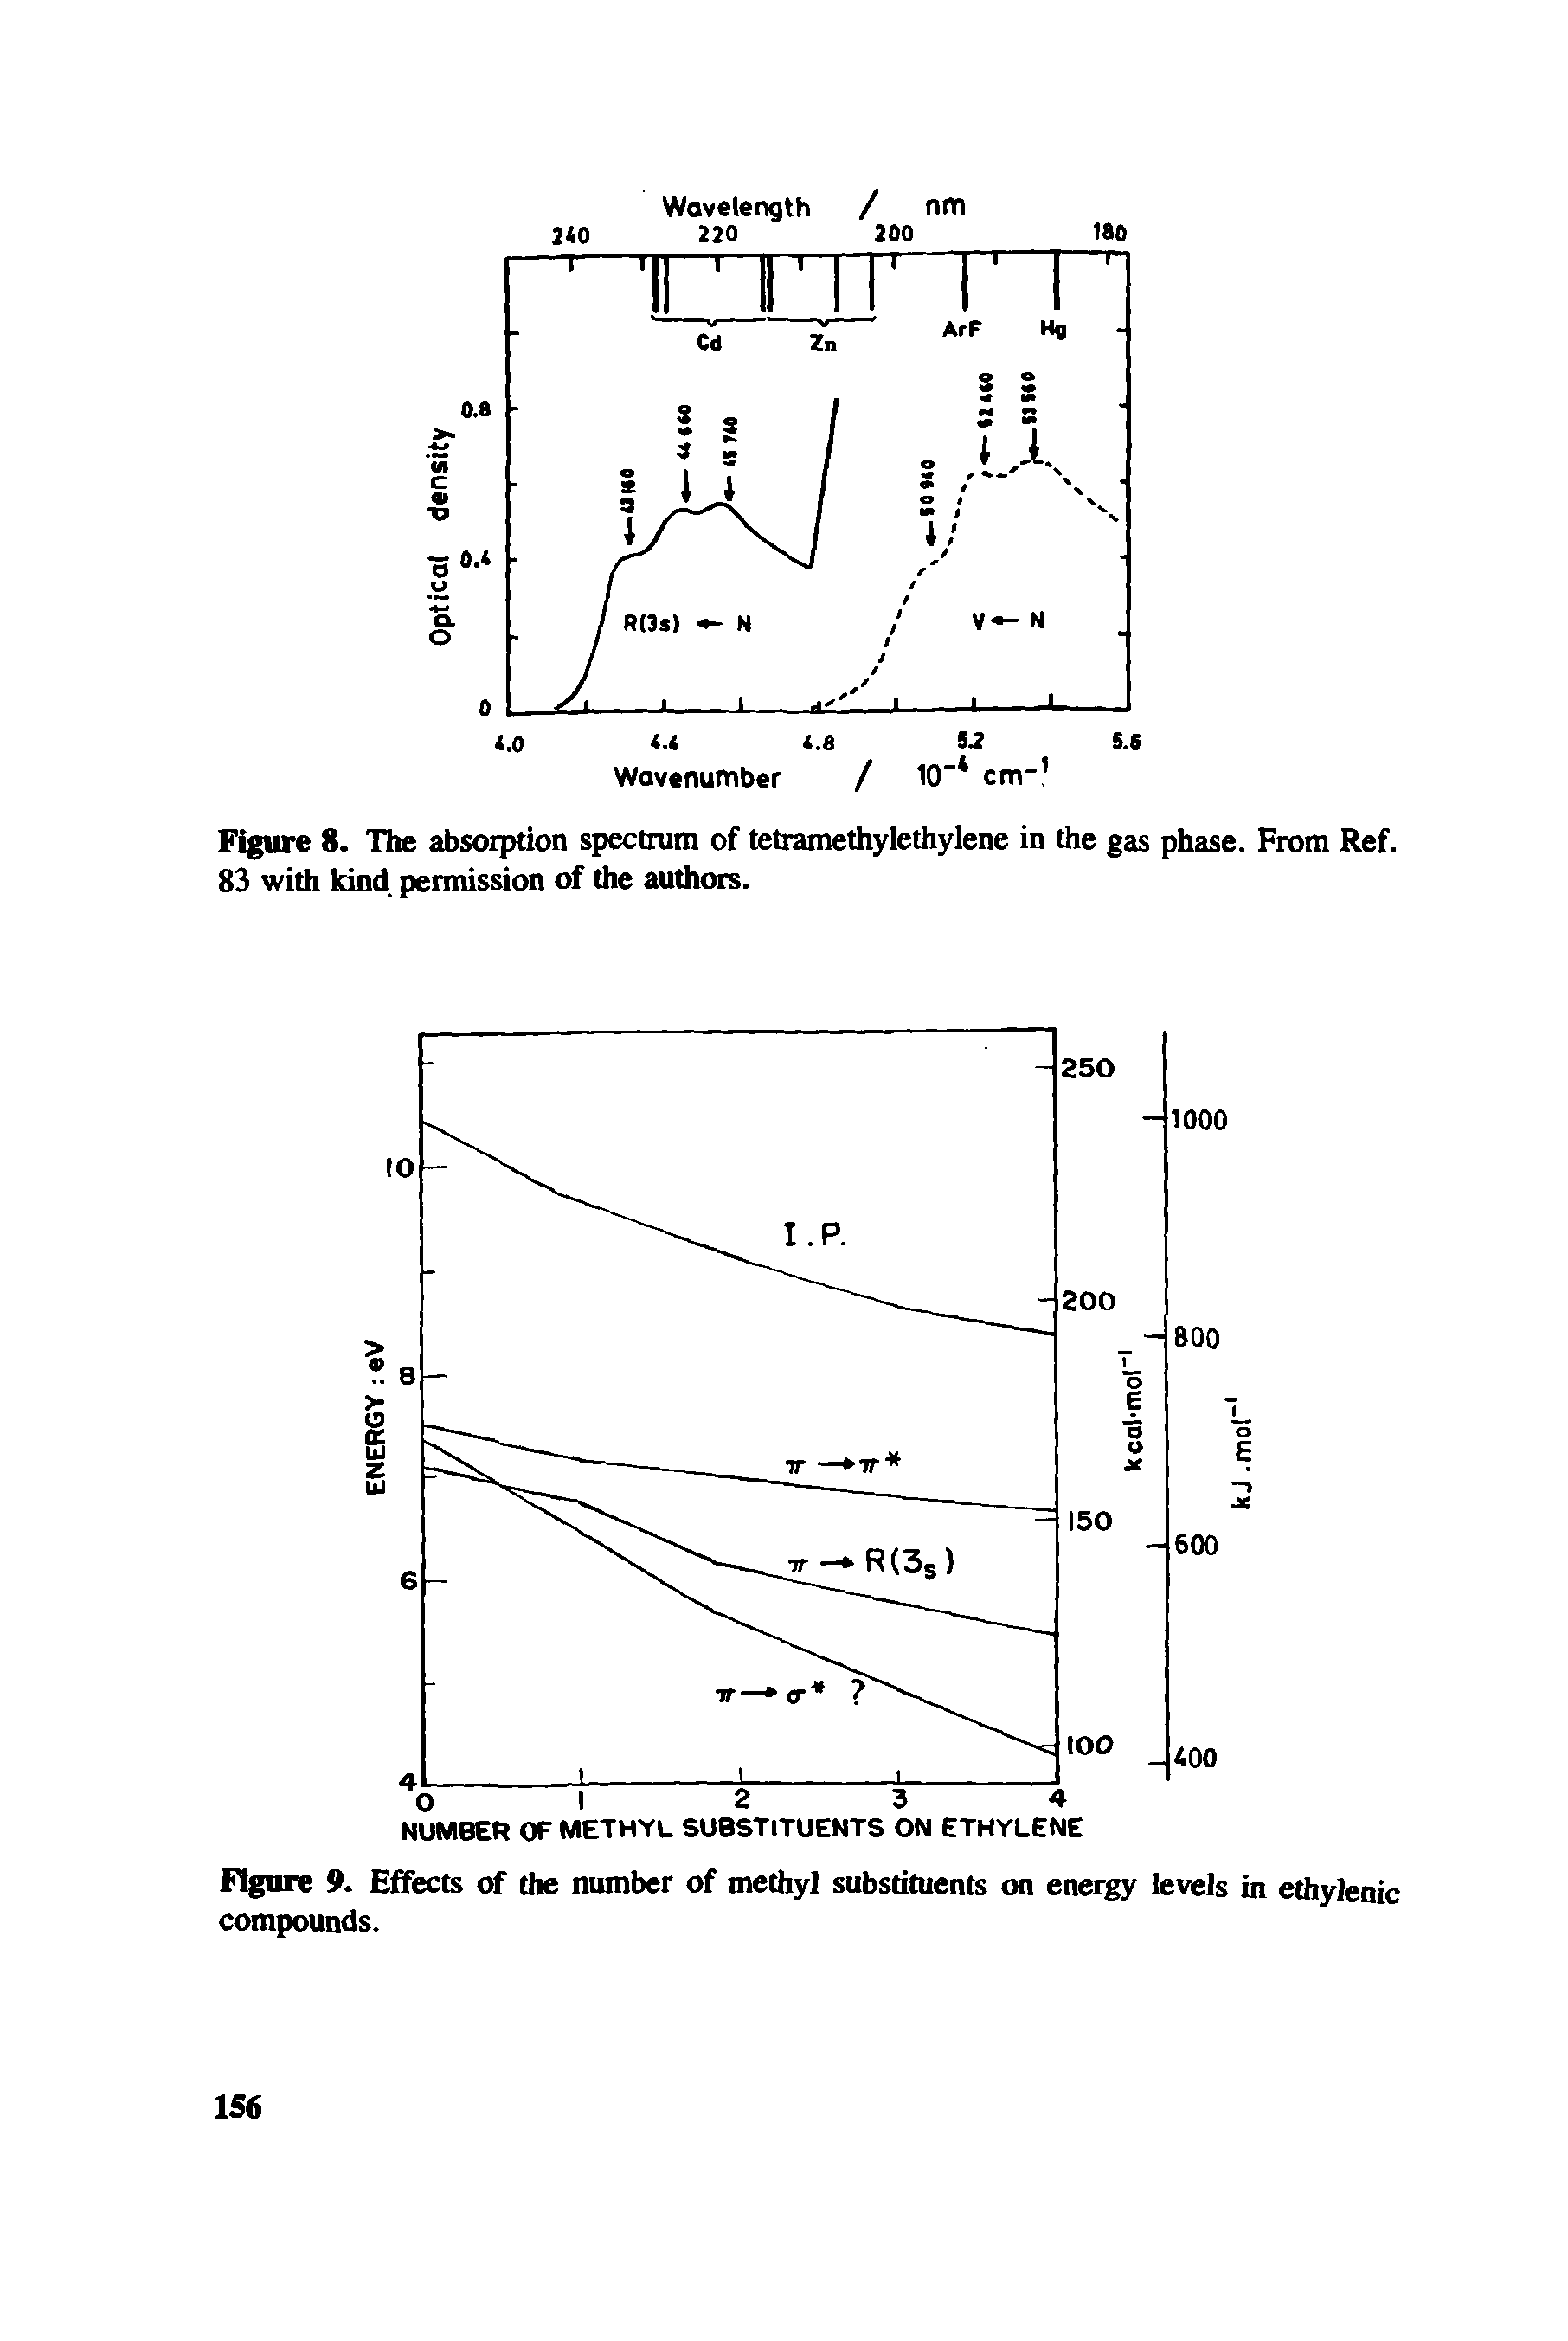 Figure 8. The absoiption spectrum of tetramethylethylene in the gas phase. From Ref. 83 with kind permission of the authors.